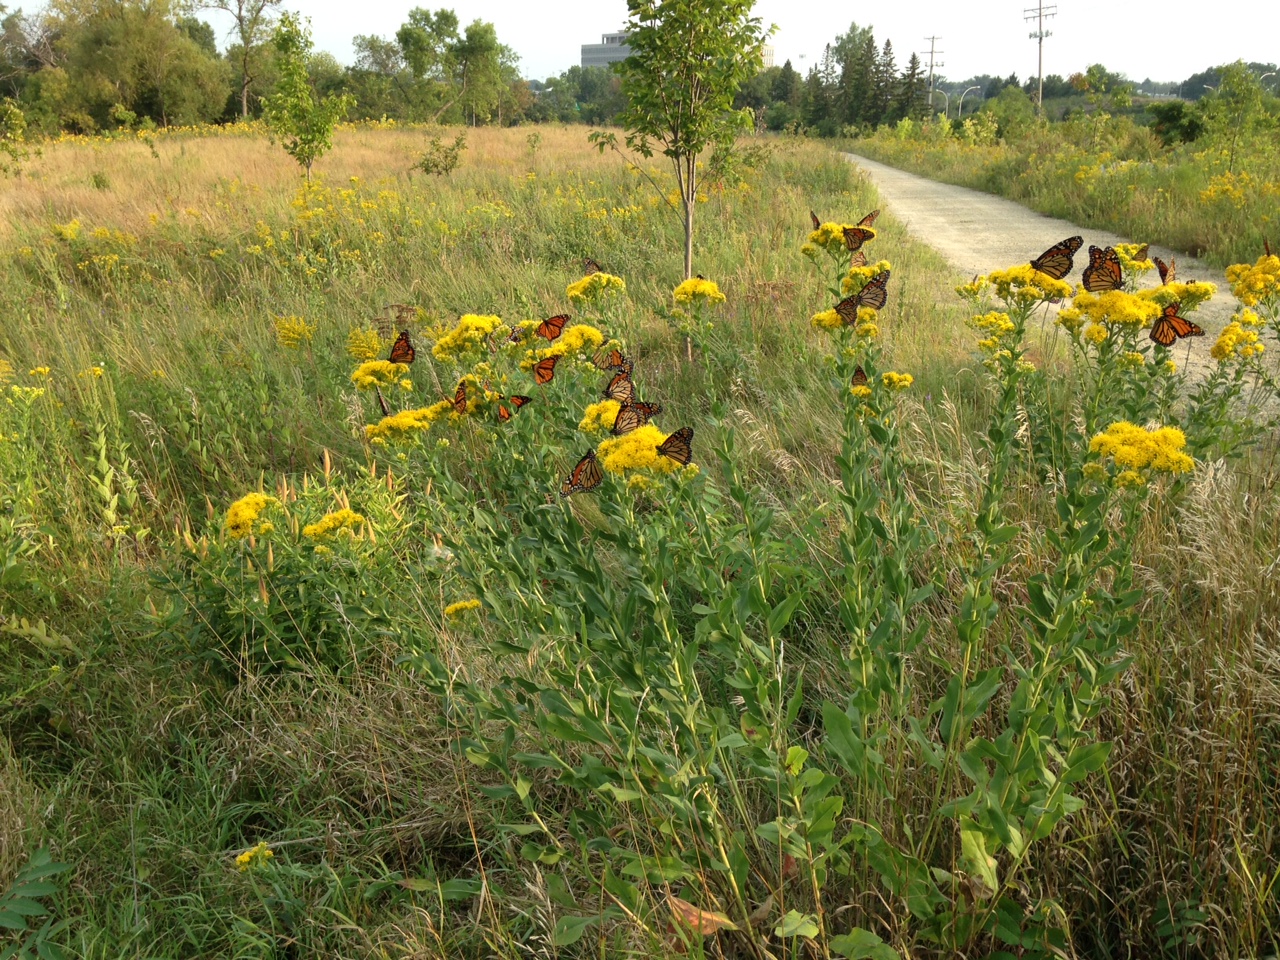 Goldenrod Vs Ragweed Which Causes Allergies And Which Benefits Pollinators Friends Of The Mississippi River